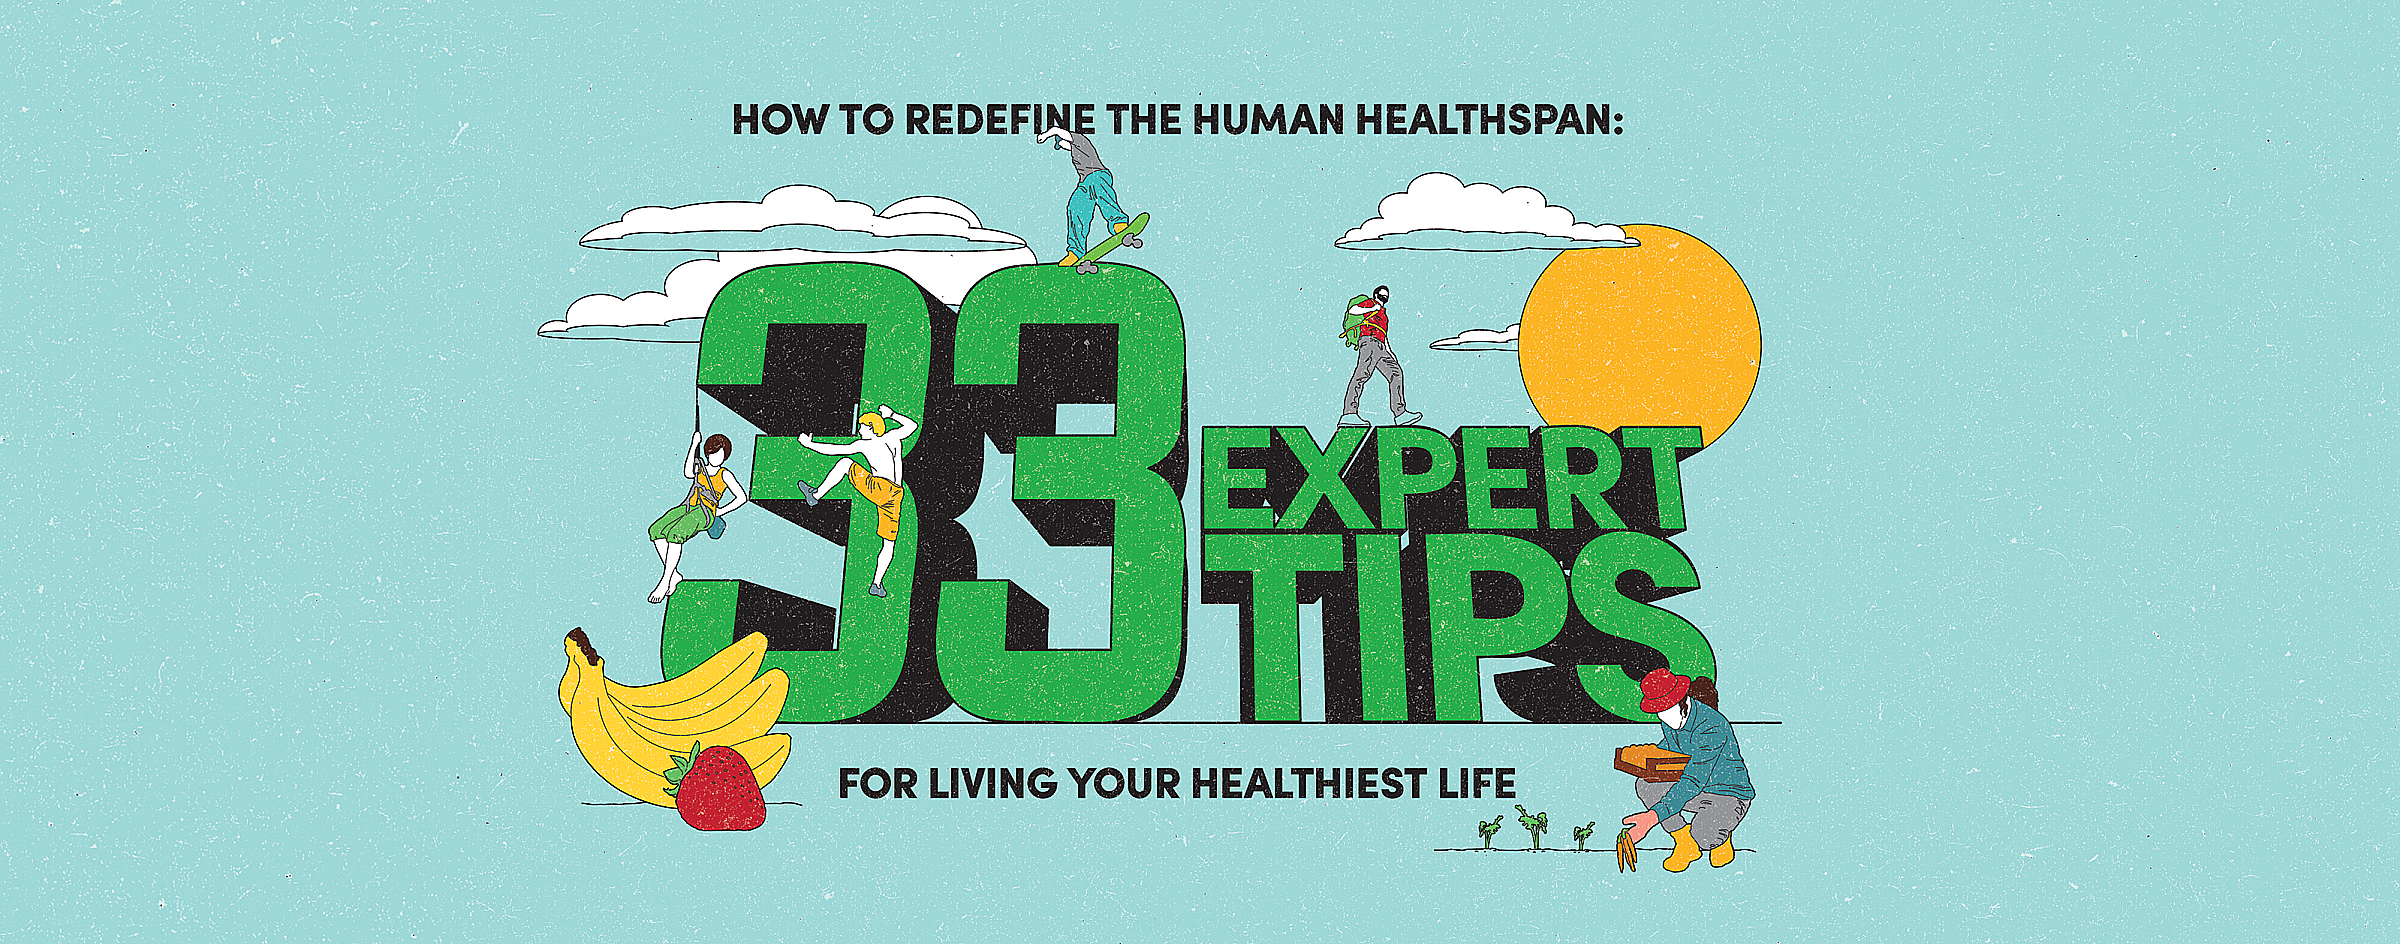 33 Expert Tips for Living your Healthiest Life